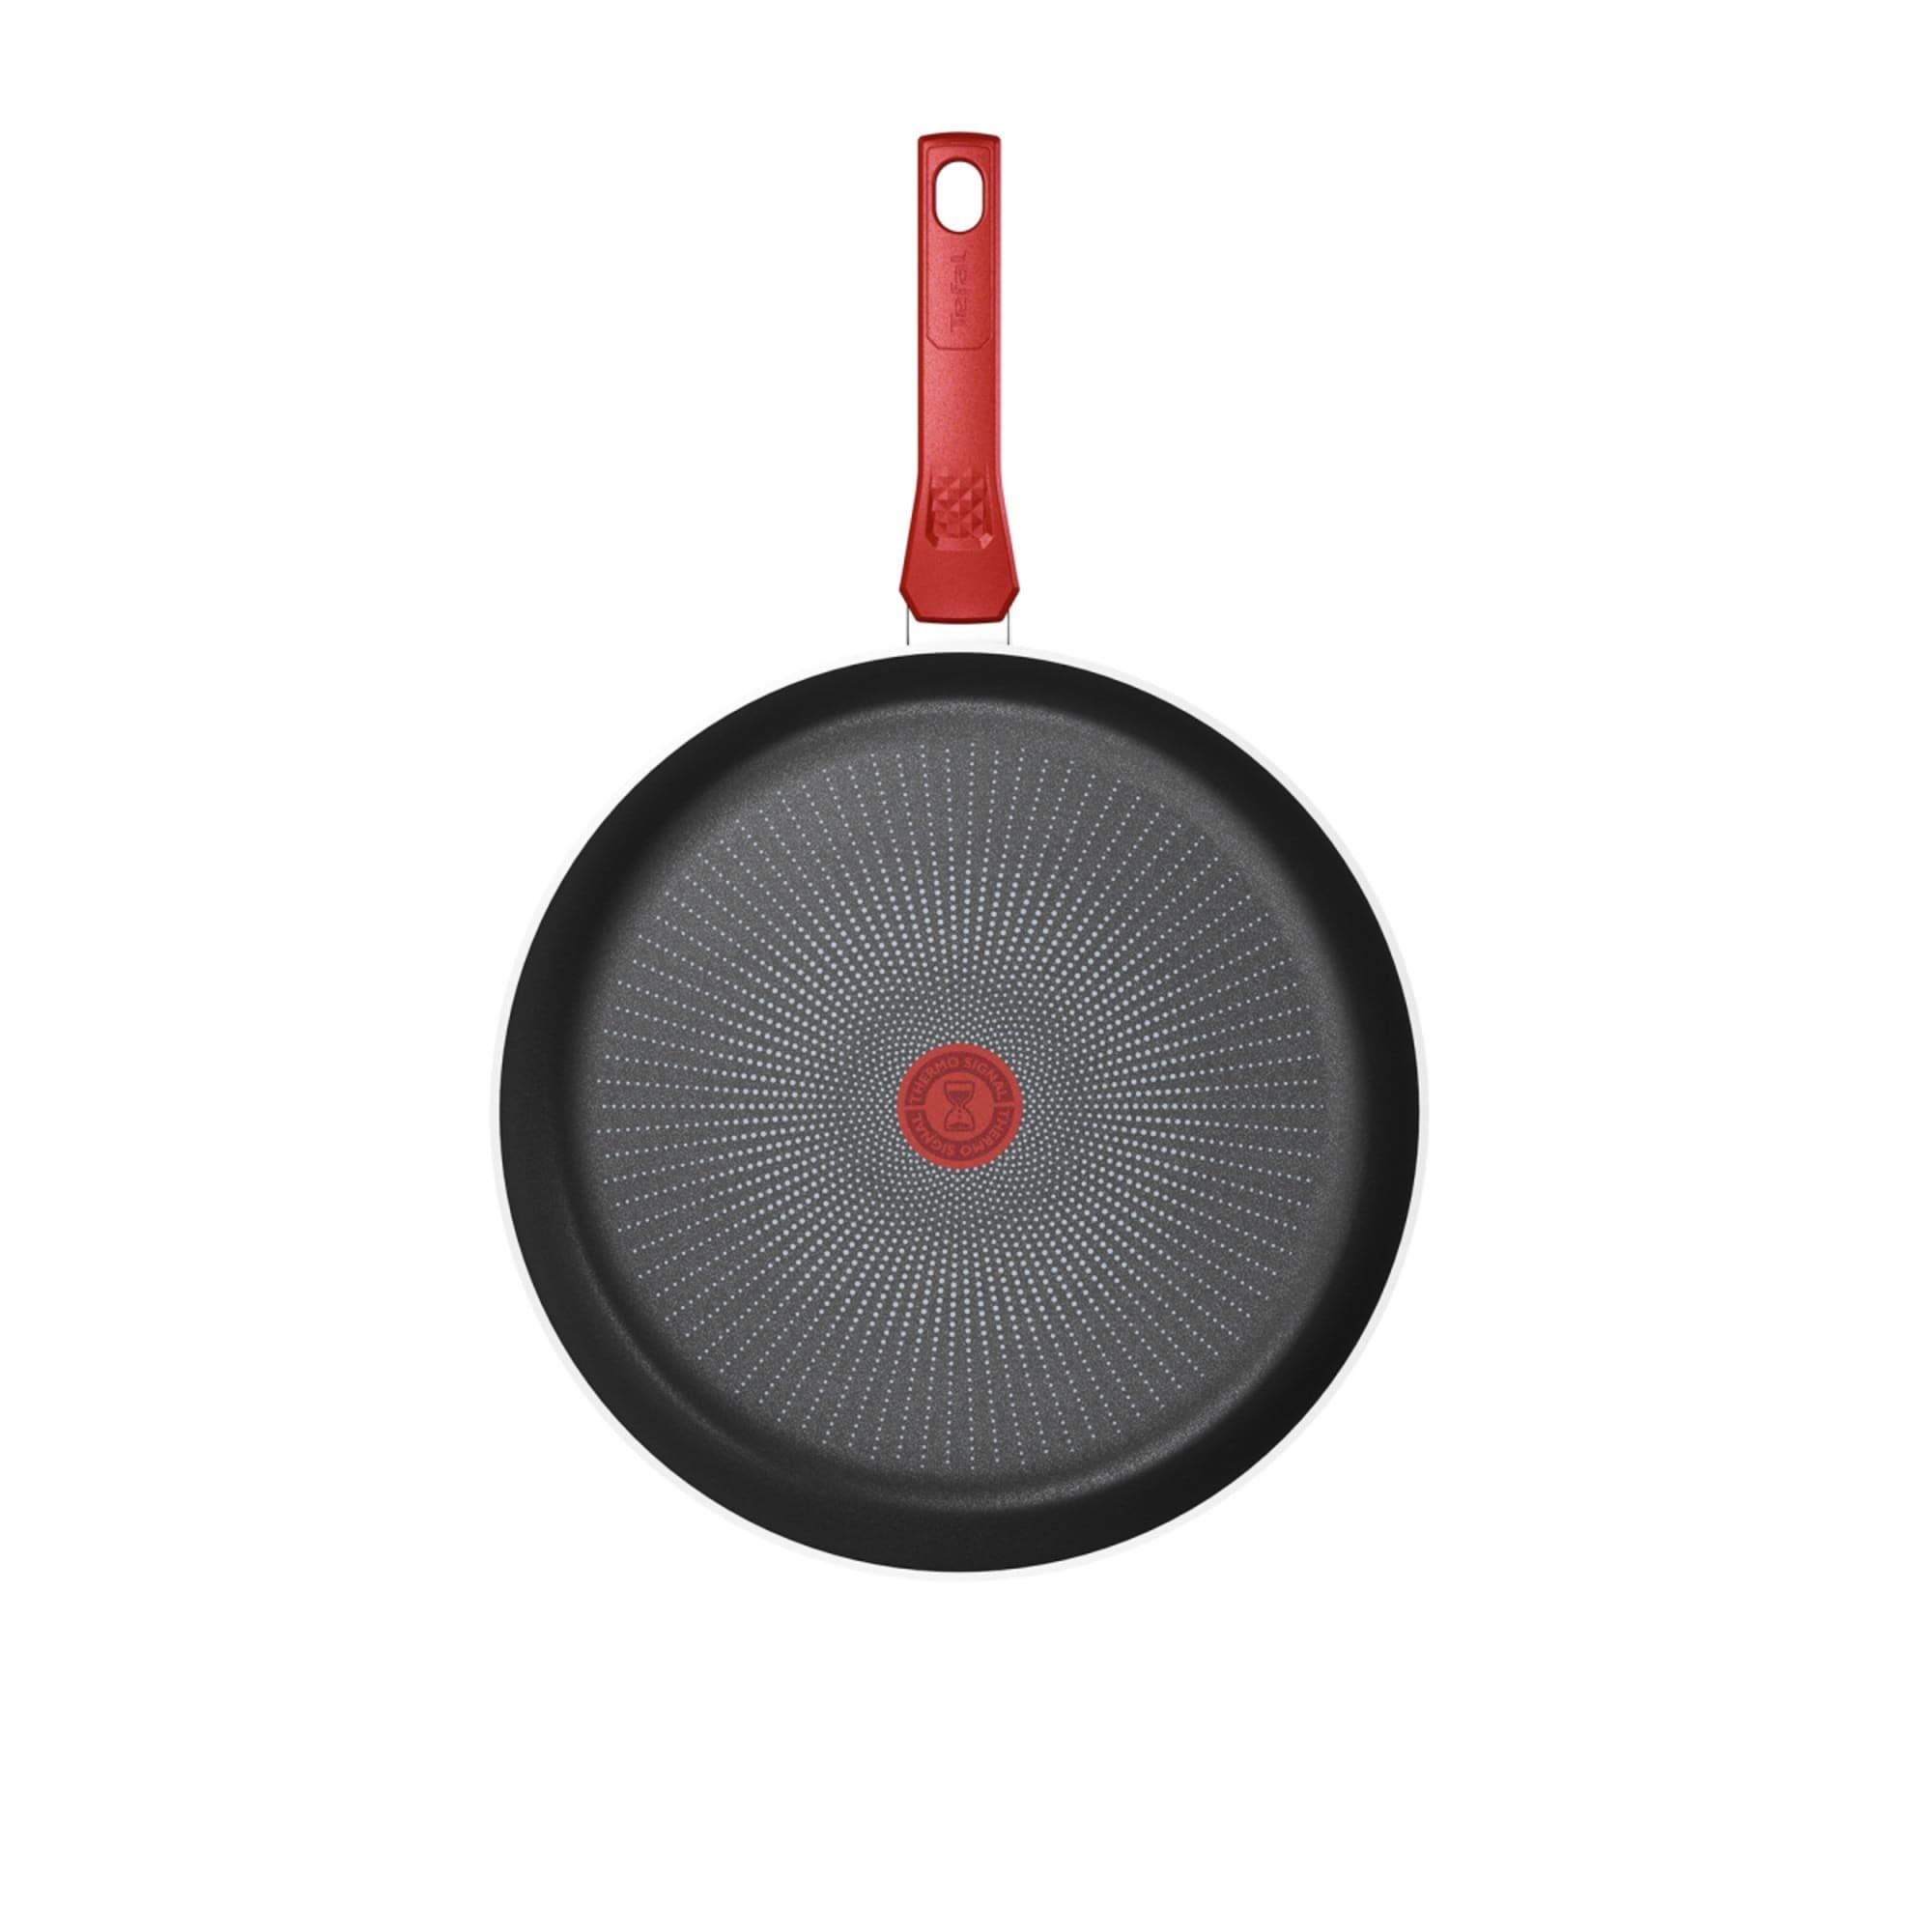 Tefal Daily Expert Frypan 32cm Red Image 3